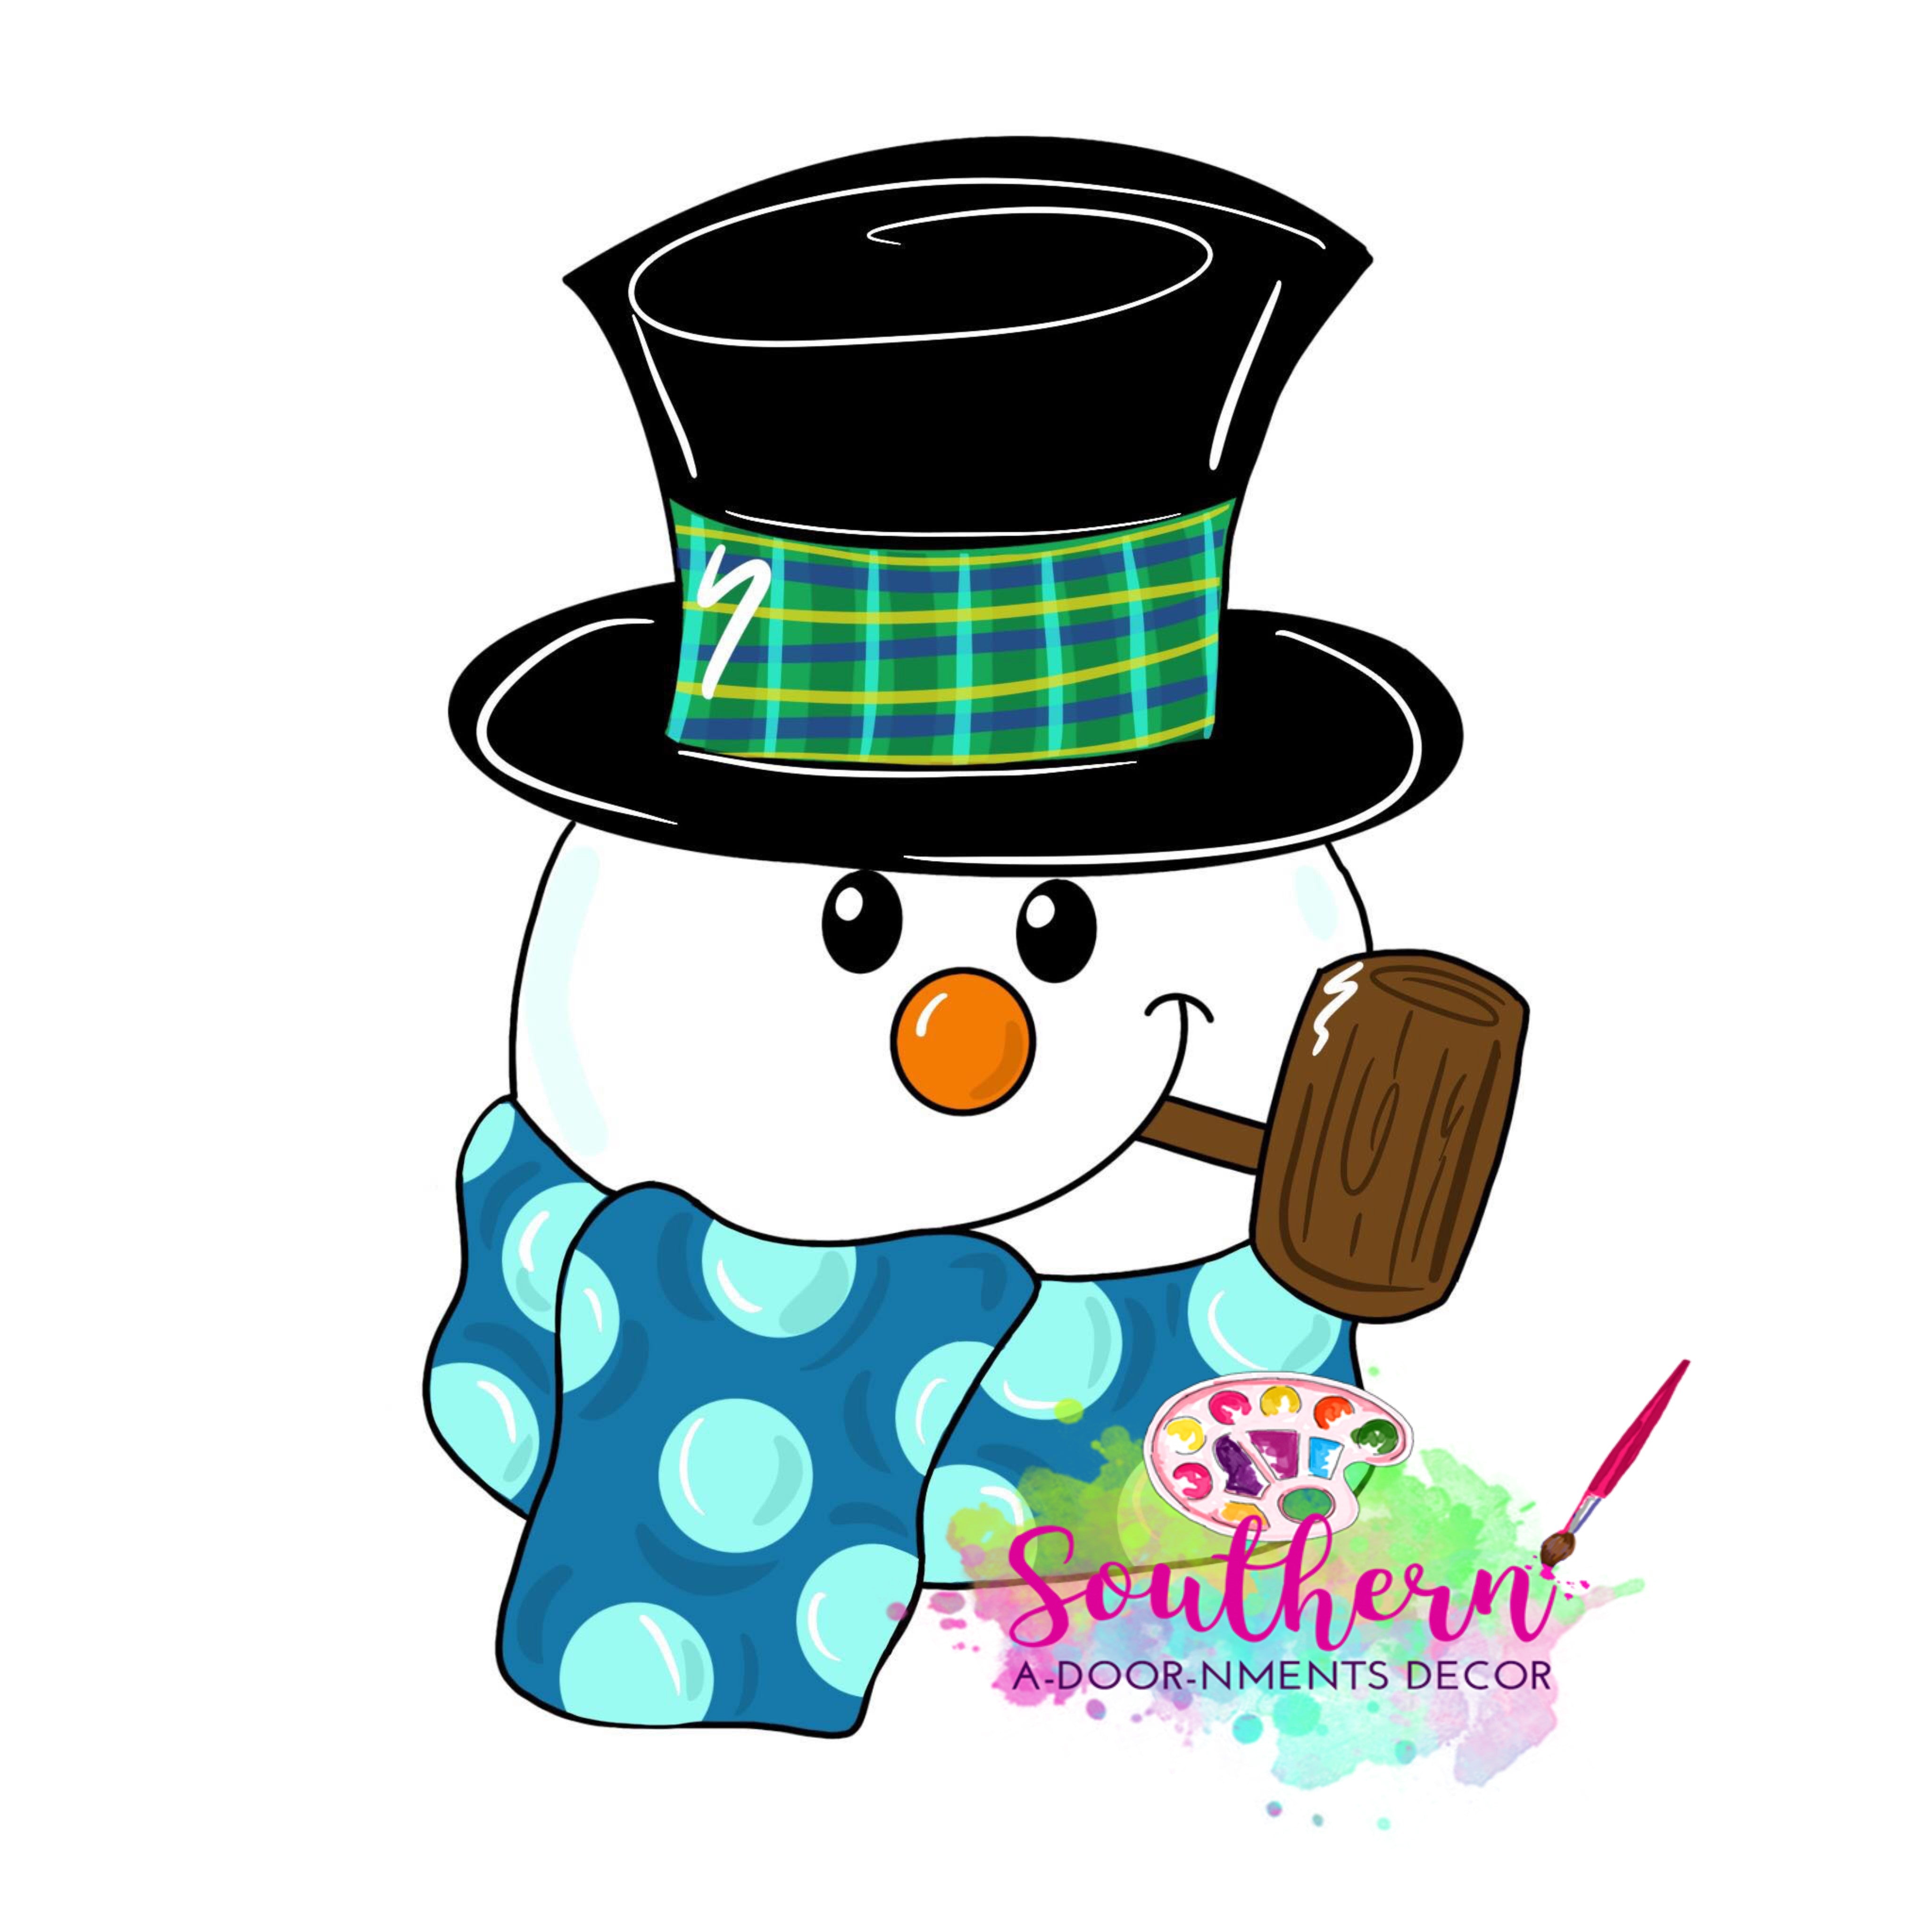 Snowman with Pipe Ornament Template & Digital Cut File